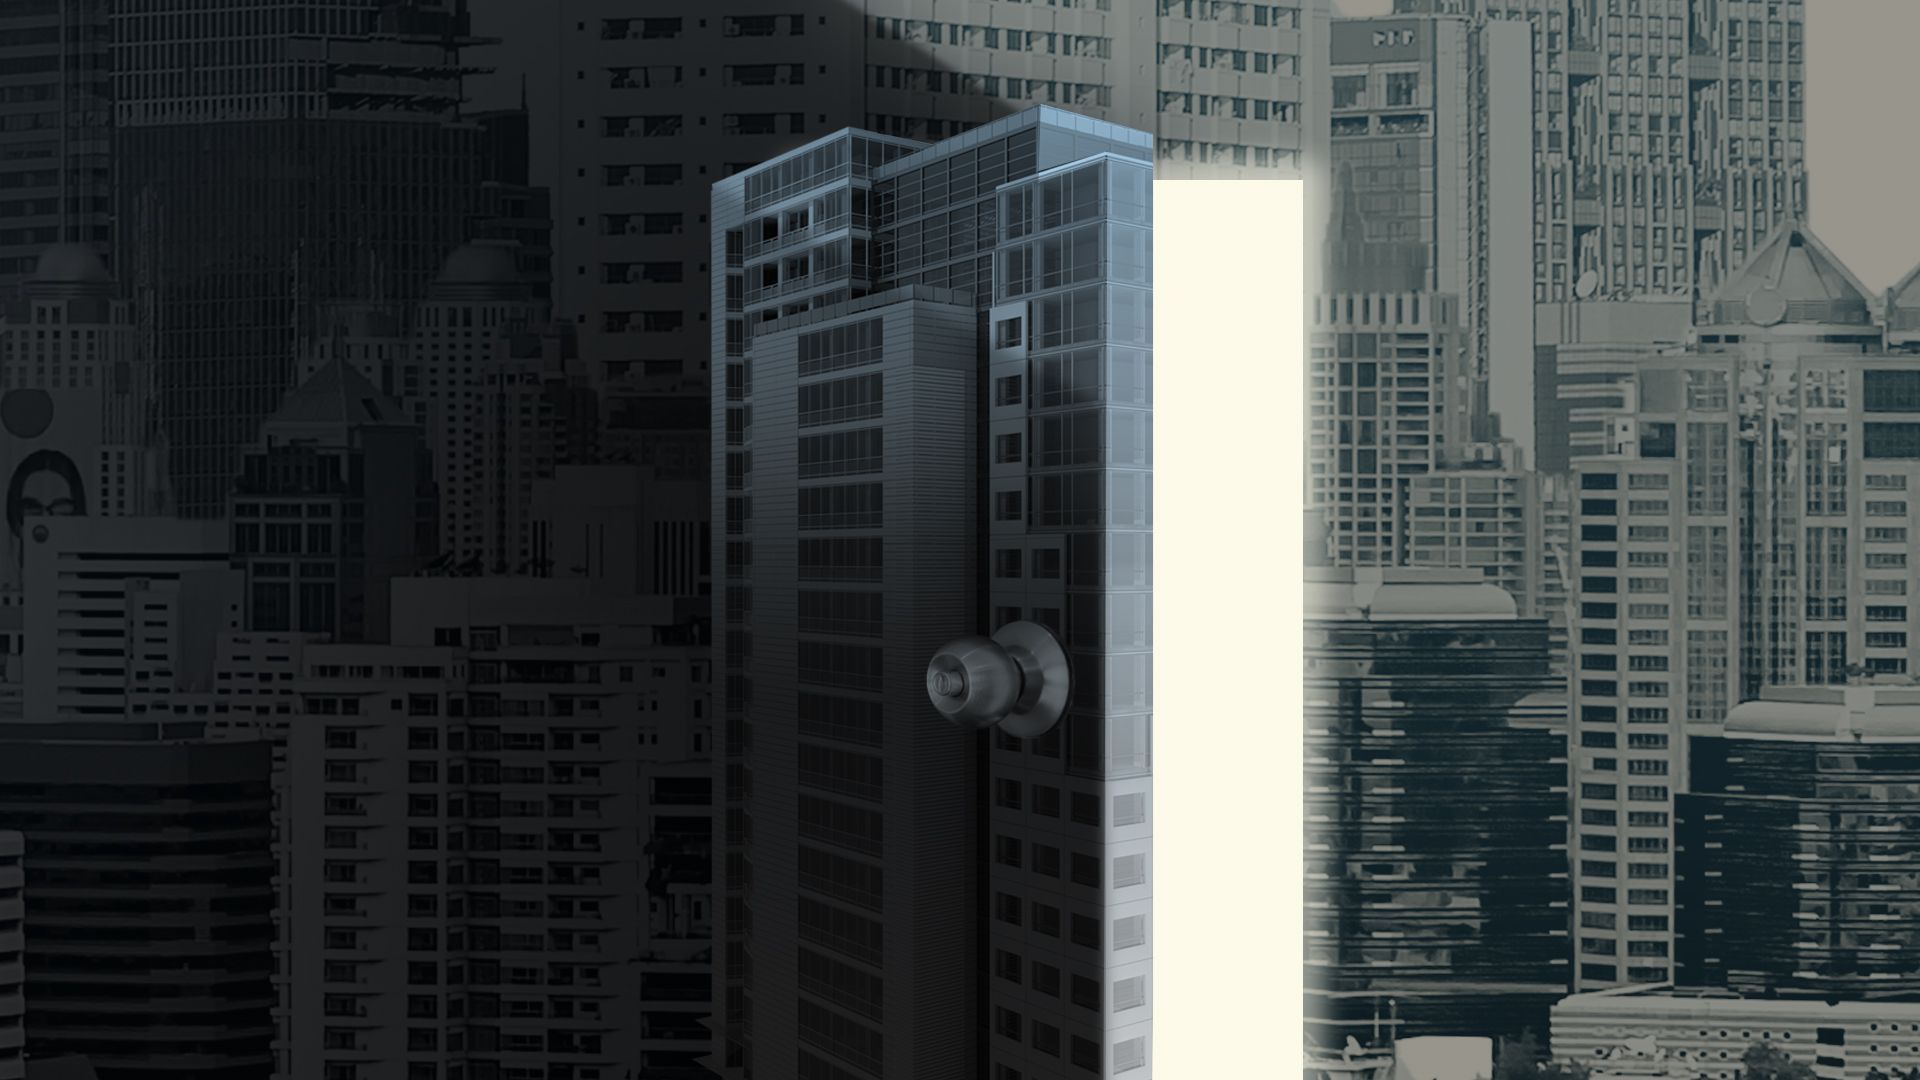 Illustration of a city skyline with one building as an open door